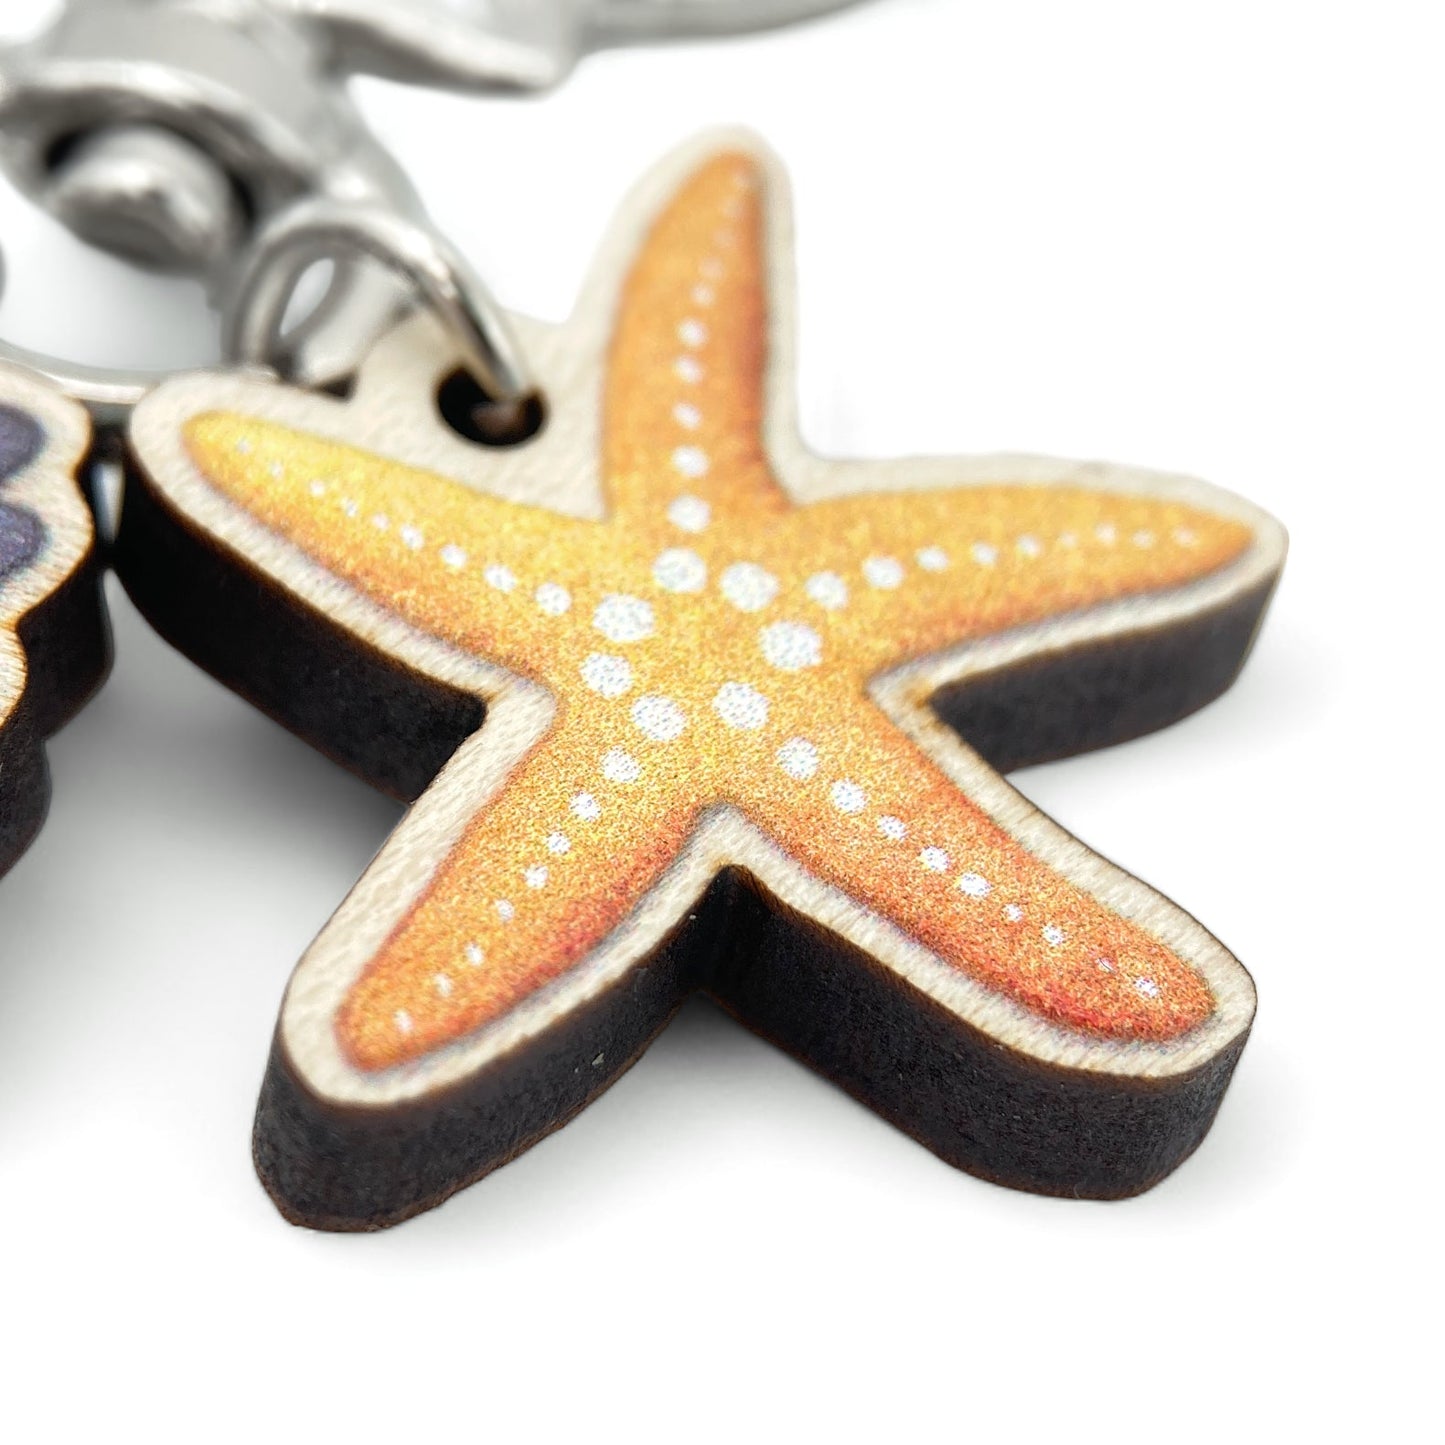 Wooden Keyring - Puffin with Starfish - Maple Wood Key Chain with Shell Clasp - East Neuk Beach Crafts